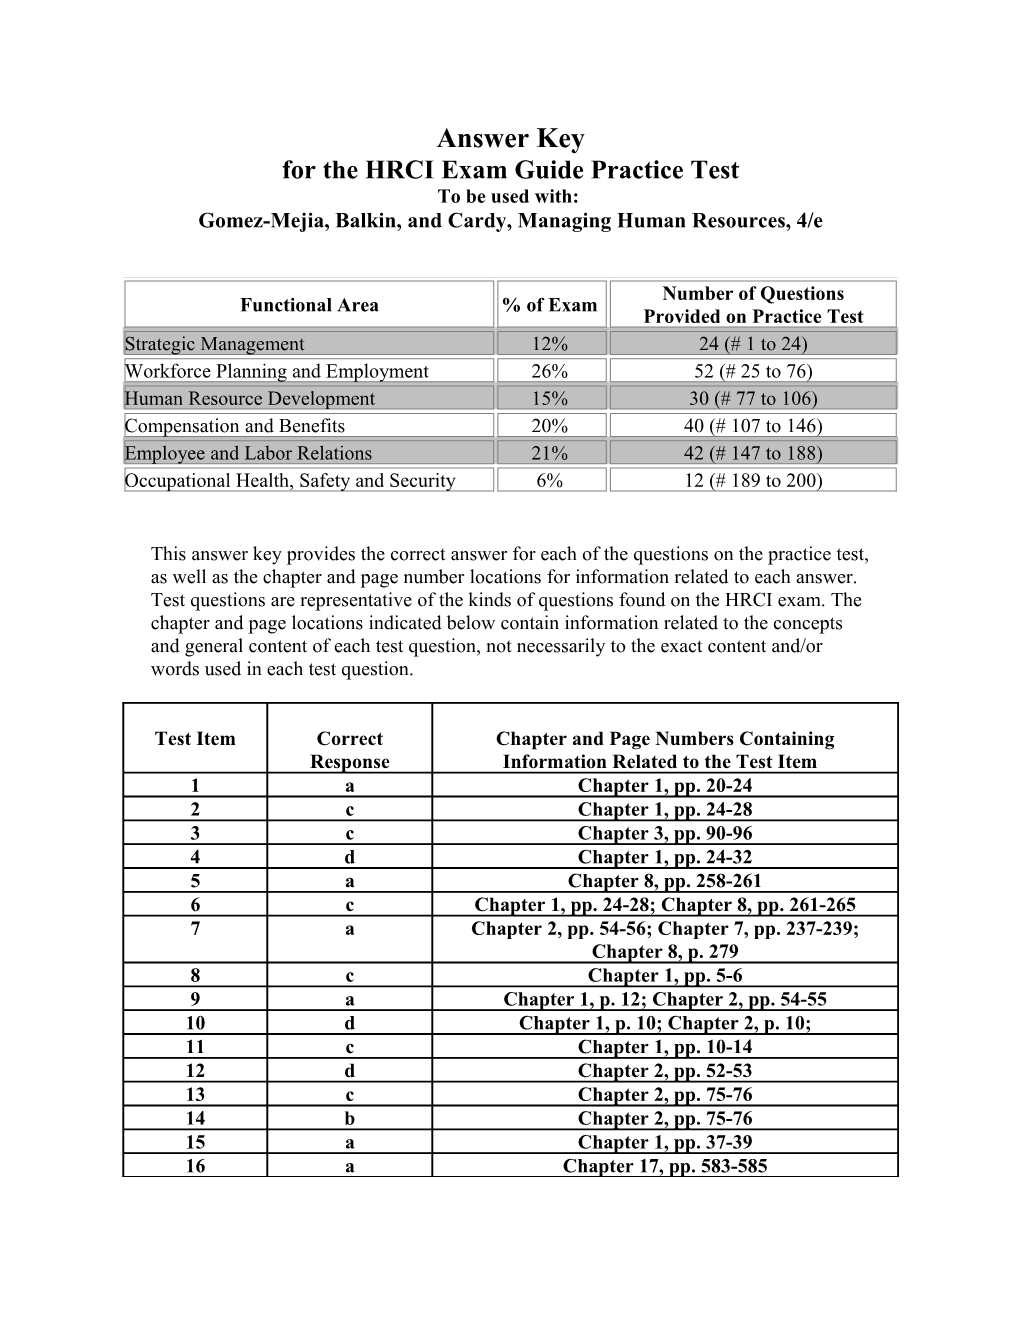 Answer Key for the HRCI Guide Practice Test